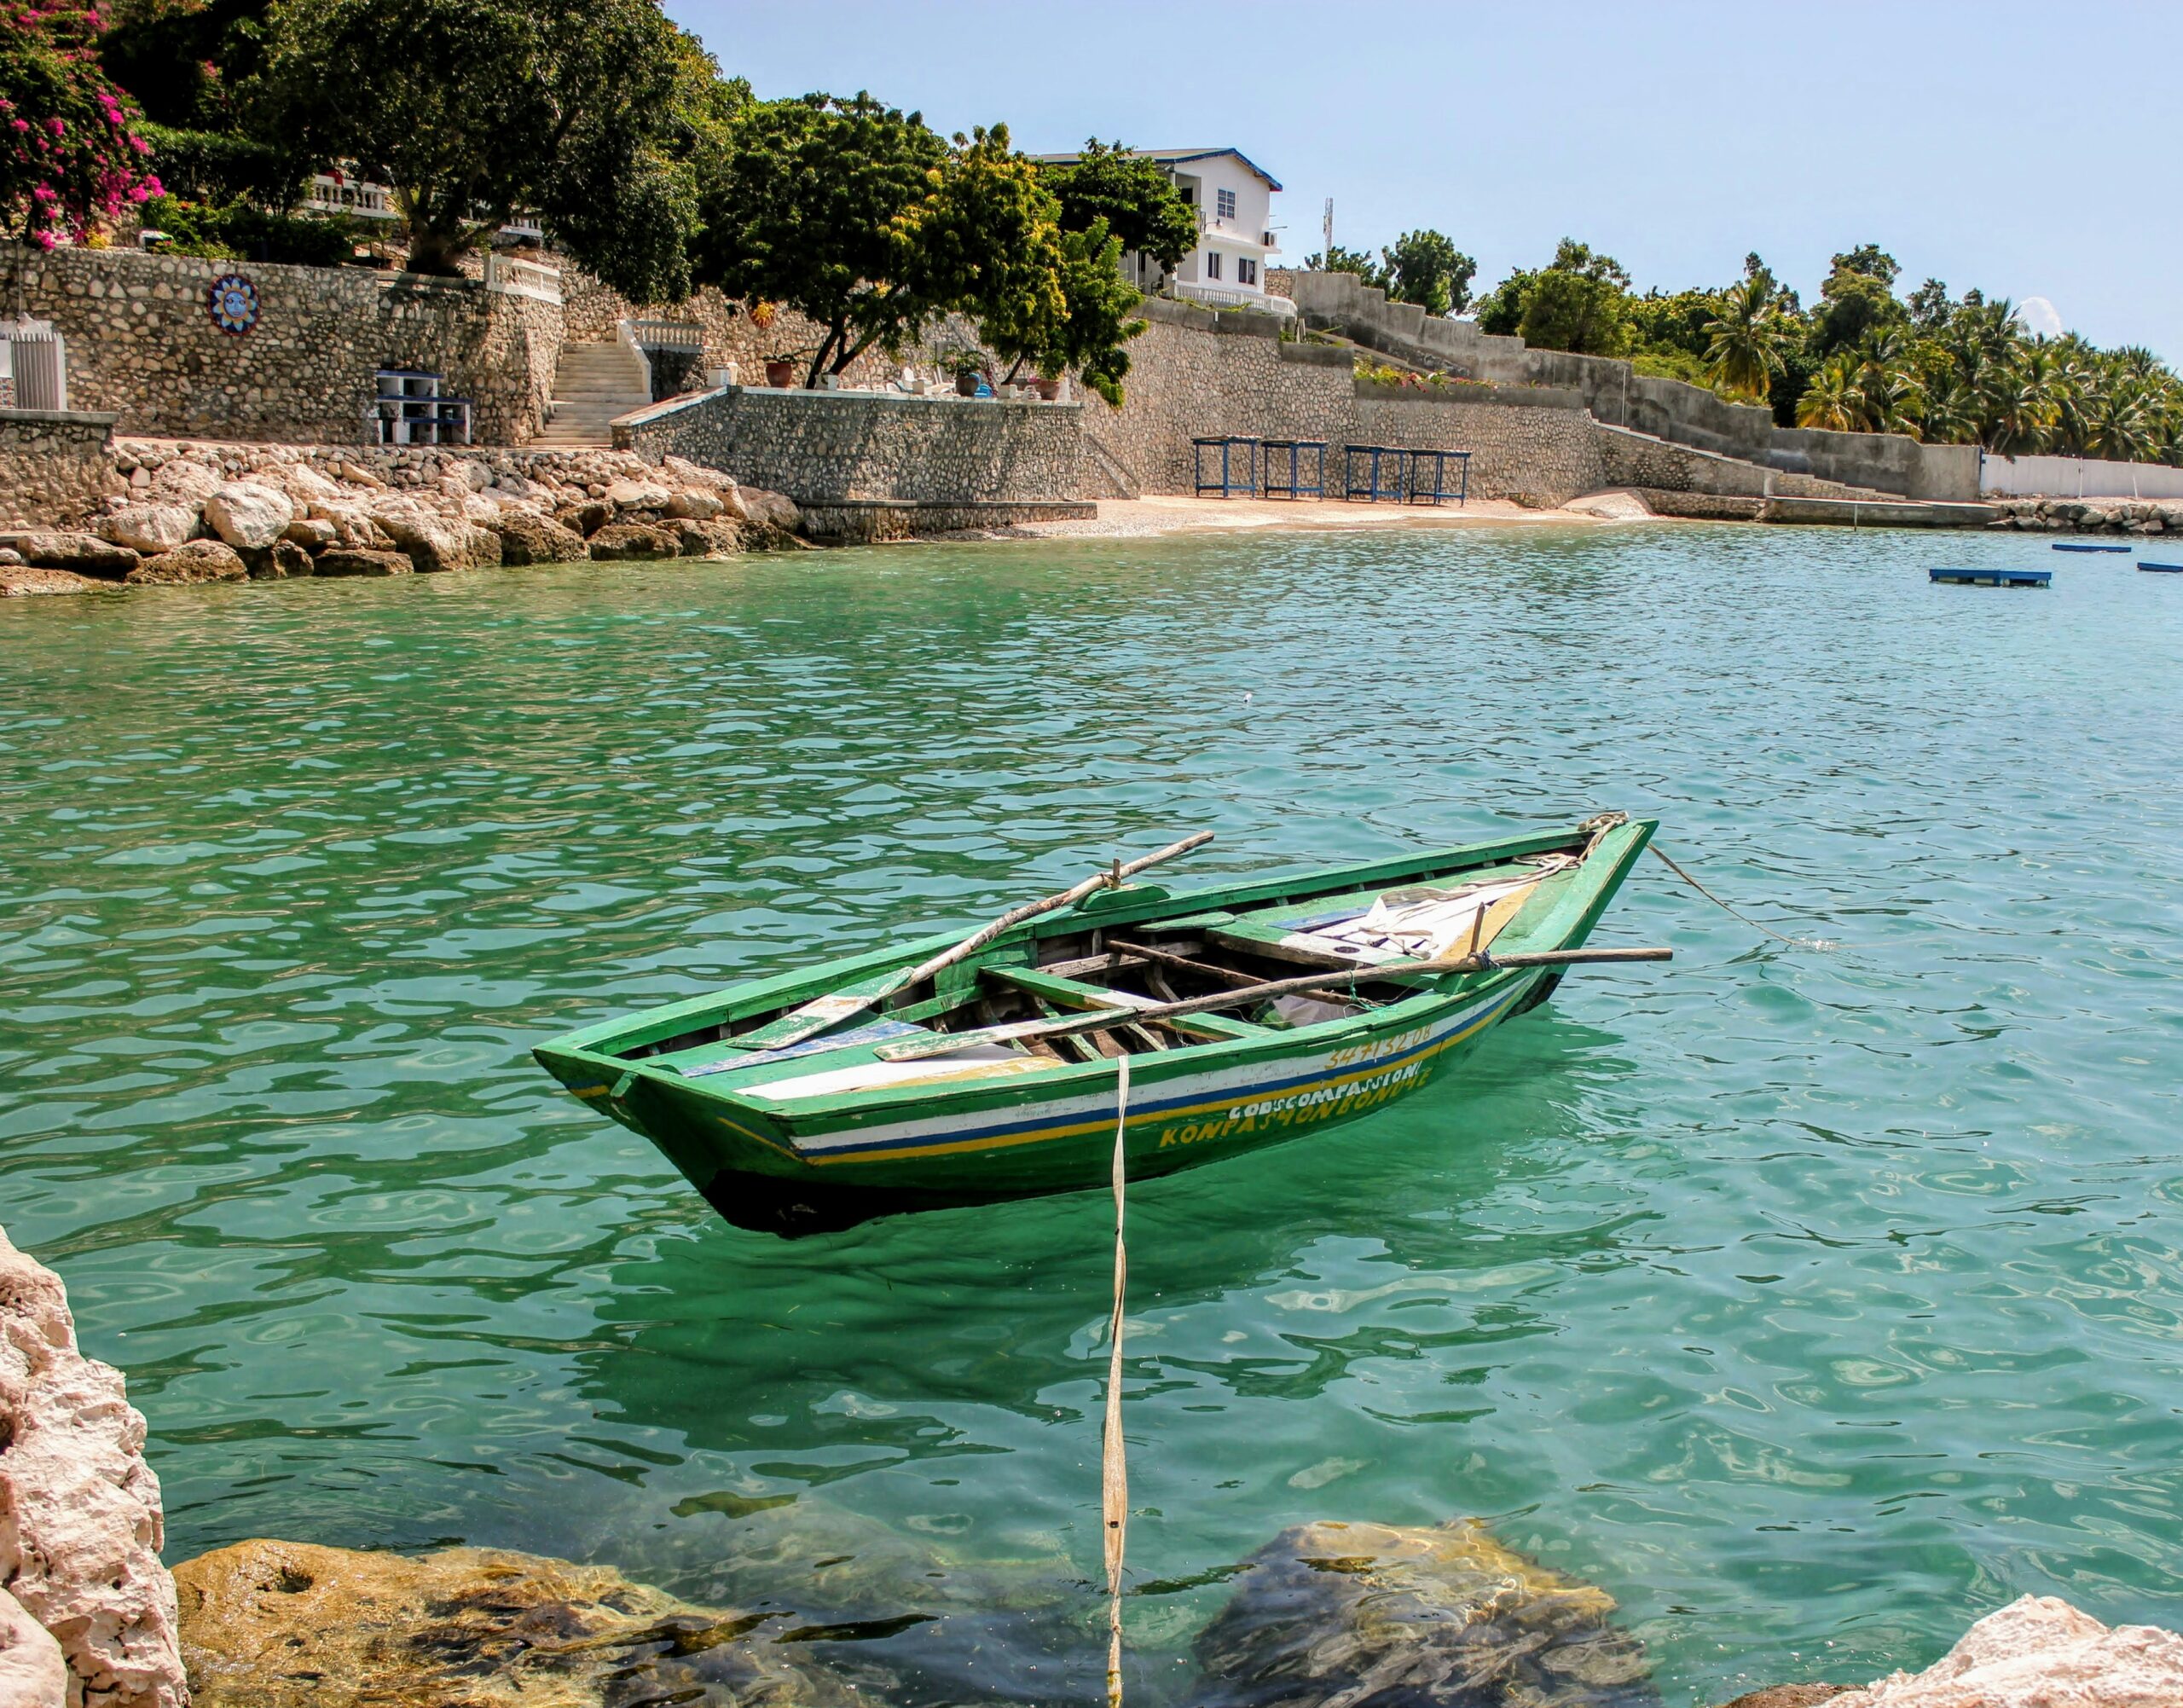 Learn how a new leader being sworn in will impact Haiti. pictured: a small boat off the coast of Haiti